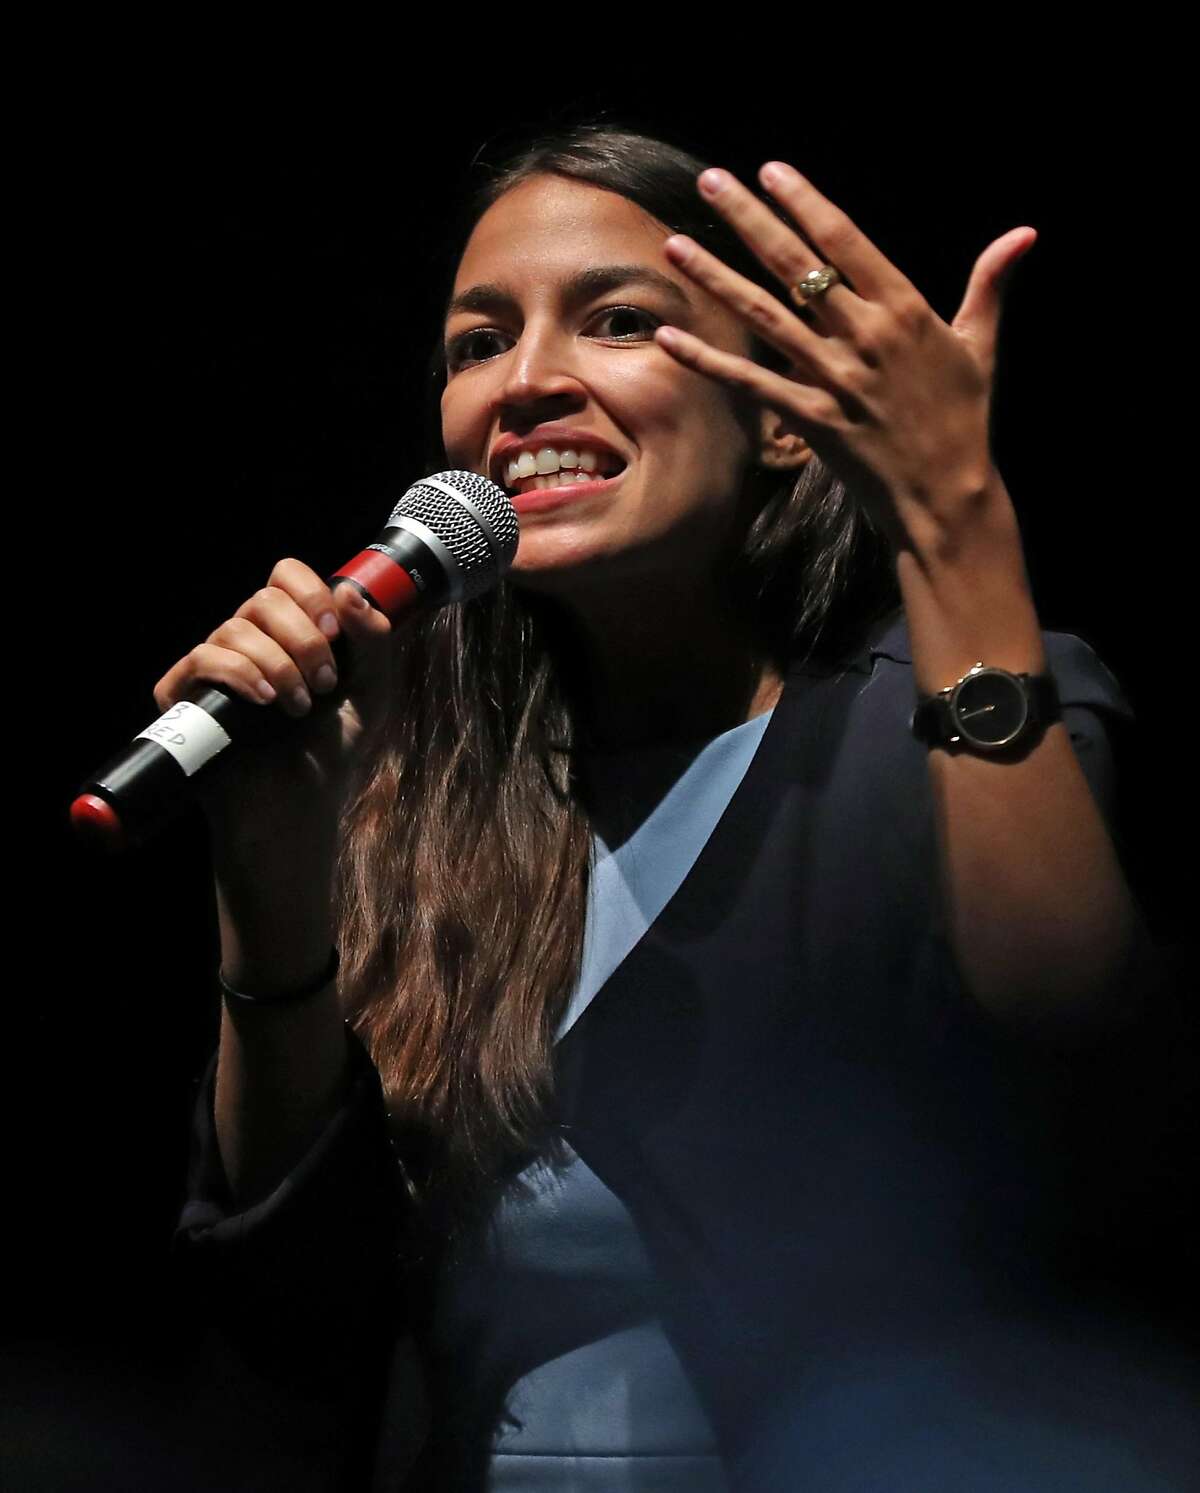 Alexandria Ocasio Cortez speaks to crowd at San Francisco Progressive Alliance event at Gray Area Grand Theater in San Francisco, Calif. on Tuesday, July 31, 2018.